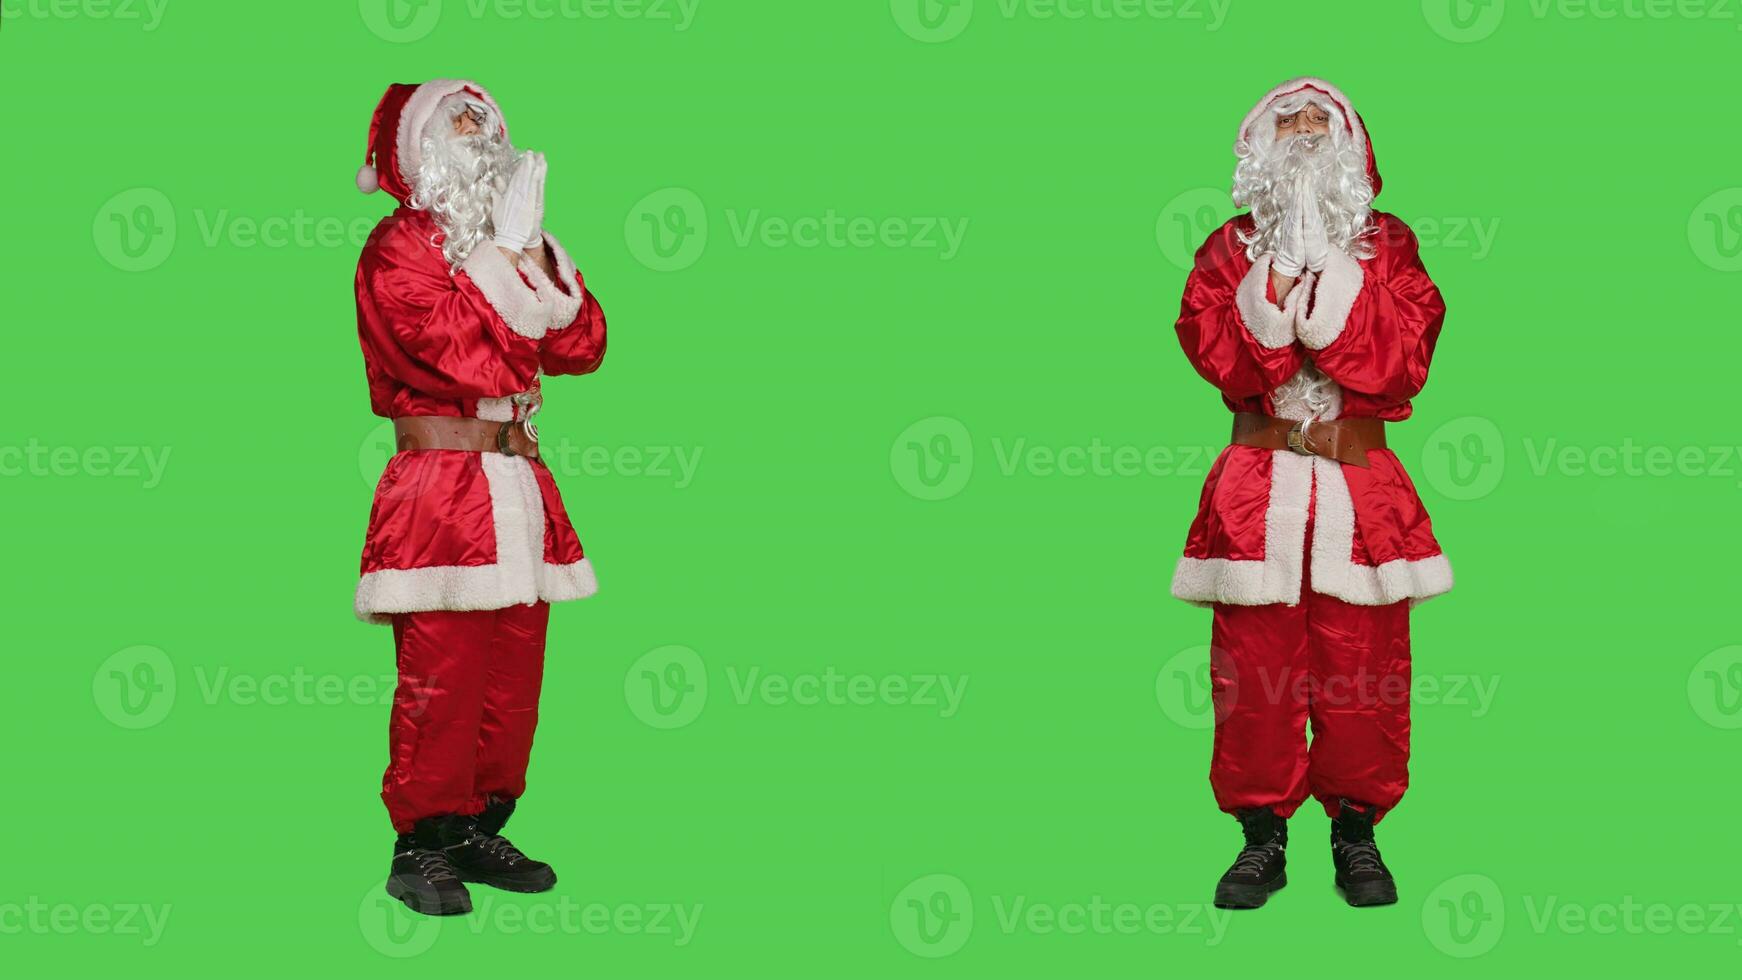 Saint nick holds hands in a prayer standing on full body greenscreen backdrop, acting spiritual in studio. Santa claus embodiment talking to jesus, spreading positive christmas eve spirit. photo